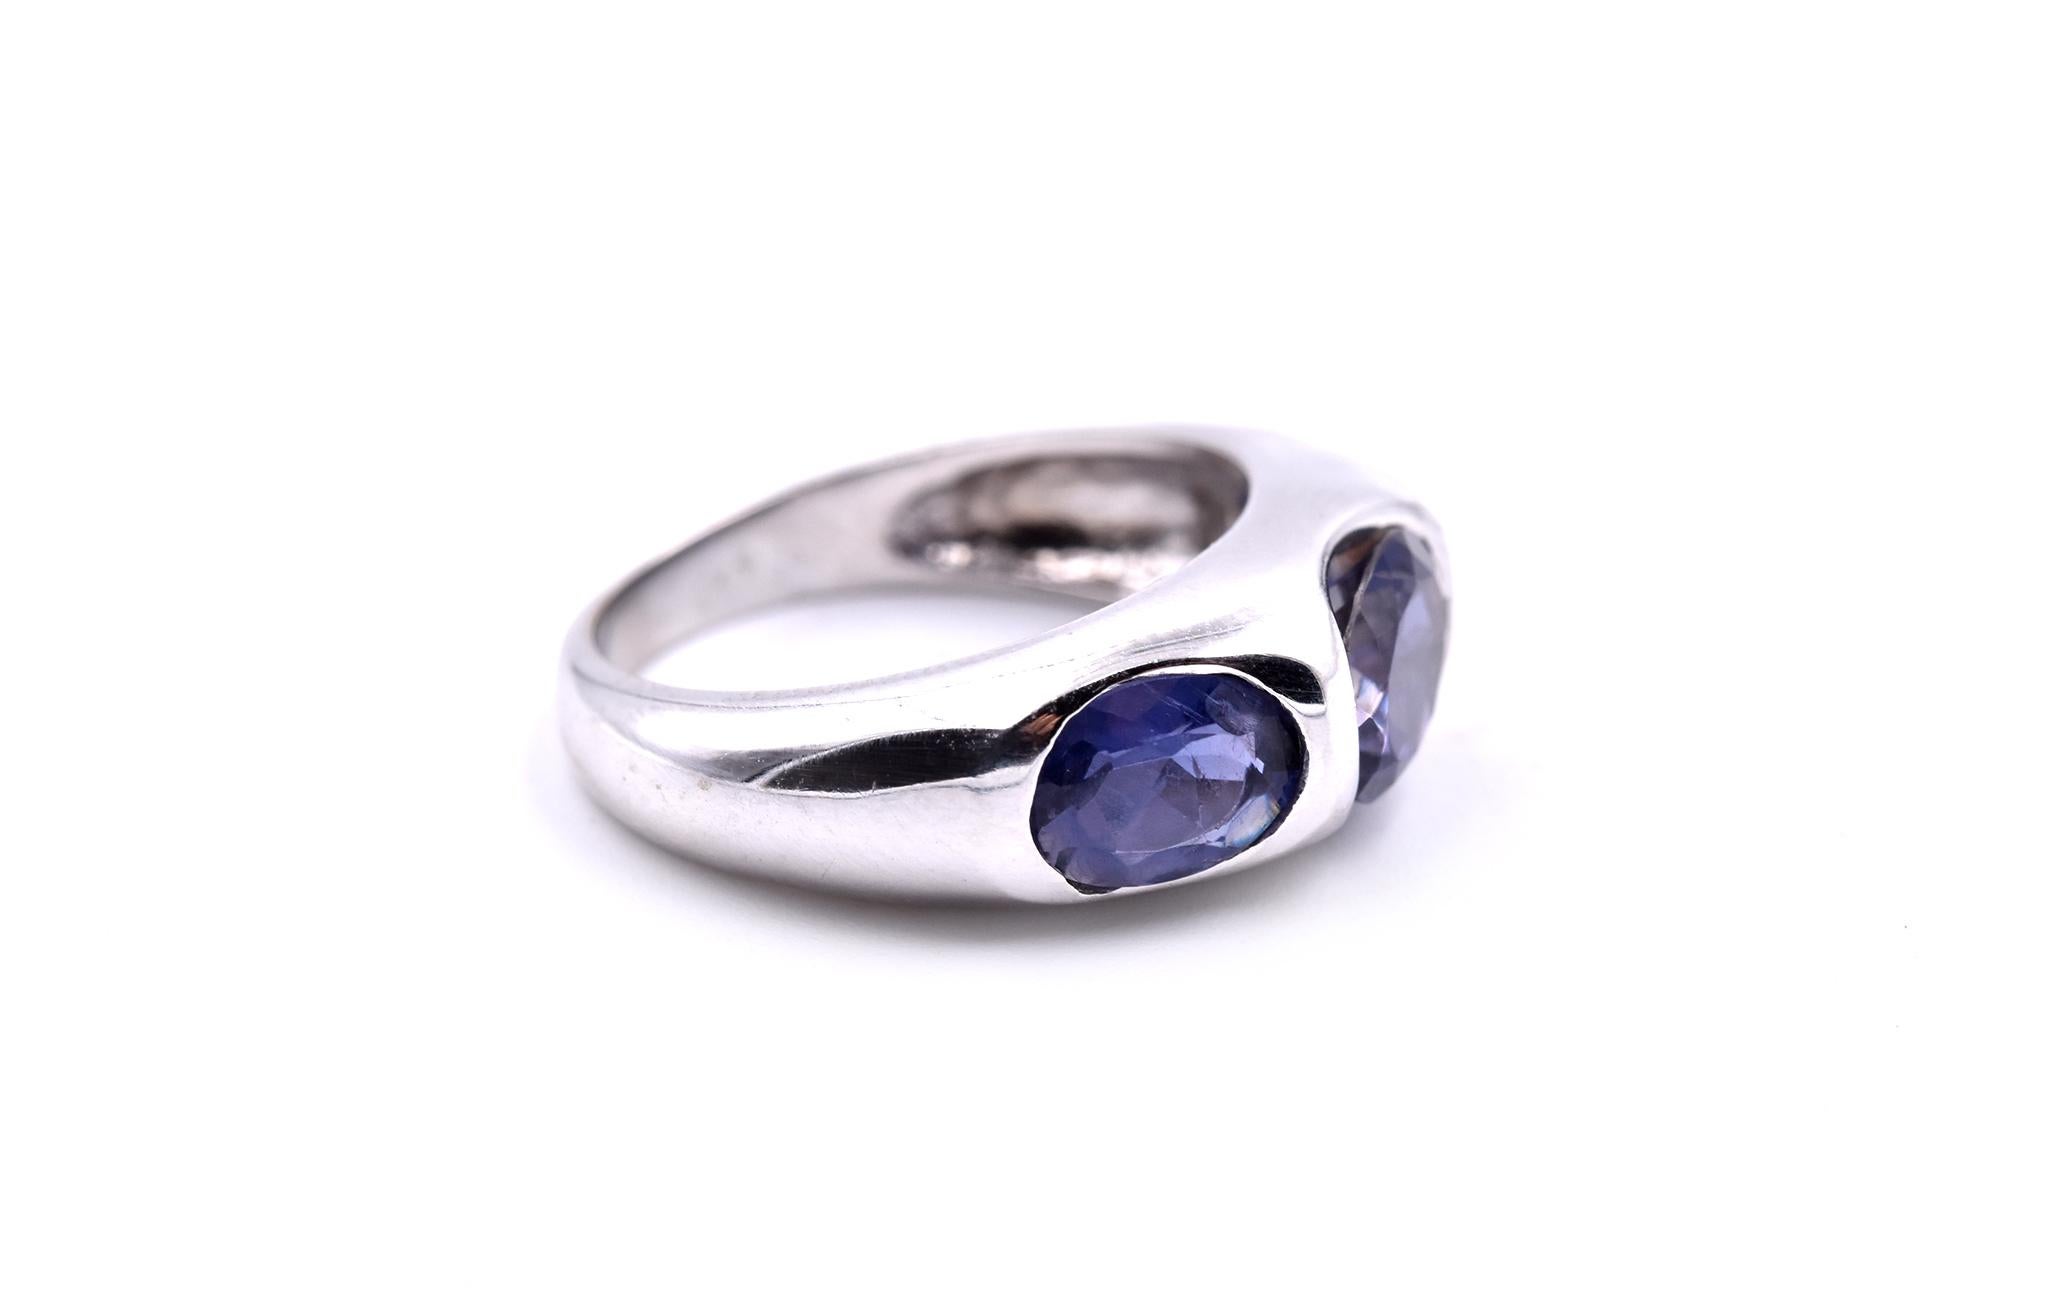 Designer: custom design
Material: 10k white gold
Stones: 3 oval cut iolite
Size: 5 ¾ (please allow two additional shipping days for sizing requests)
Dimensions: ring top is 7.20 wide 
Weight: 4.65 grams
